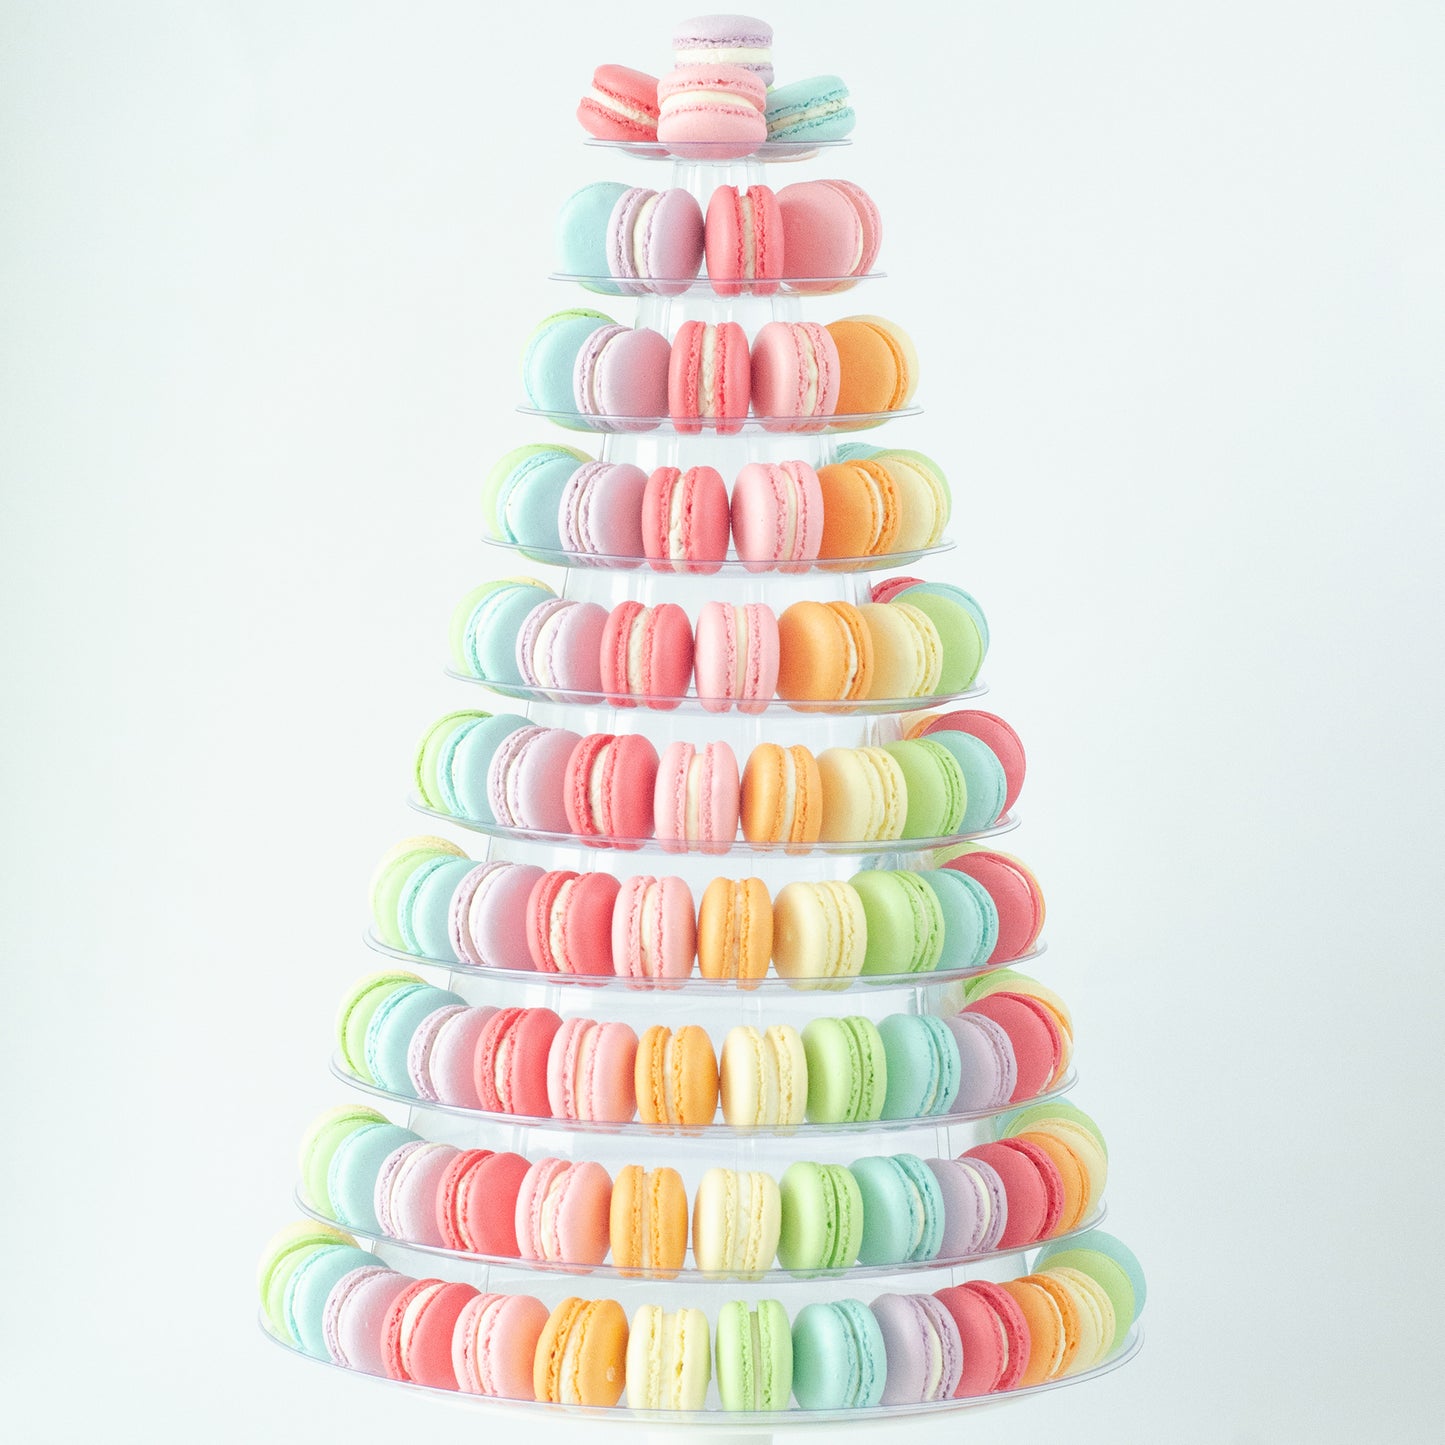 10-Tier Grand Macaron Tower (200pcs Classic Macaron) | Includes Free Tower | Grand Luxury Display of Macarons